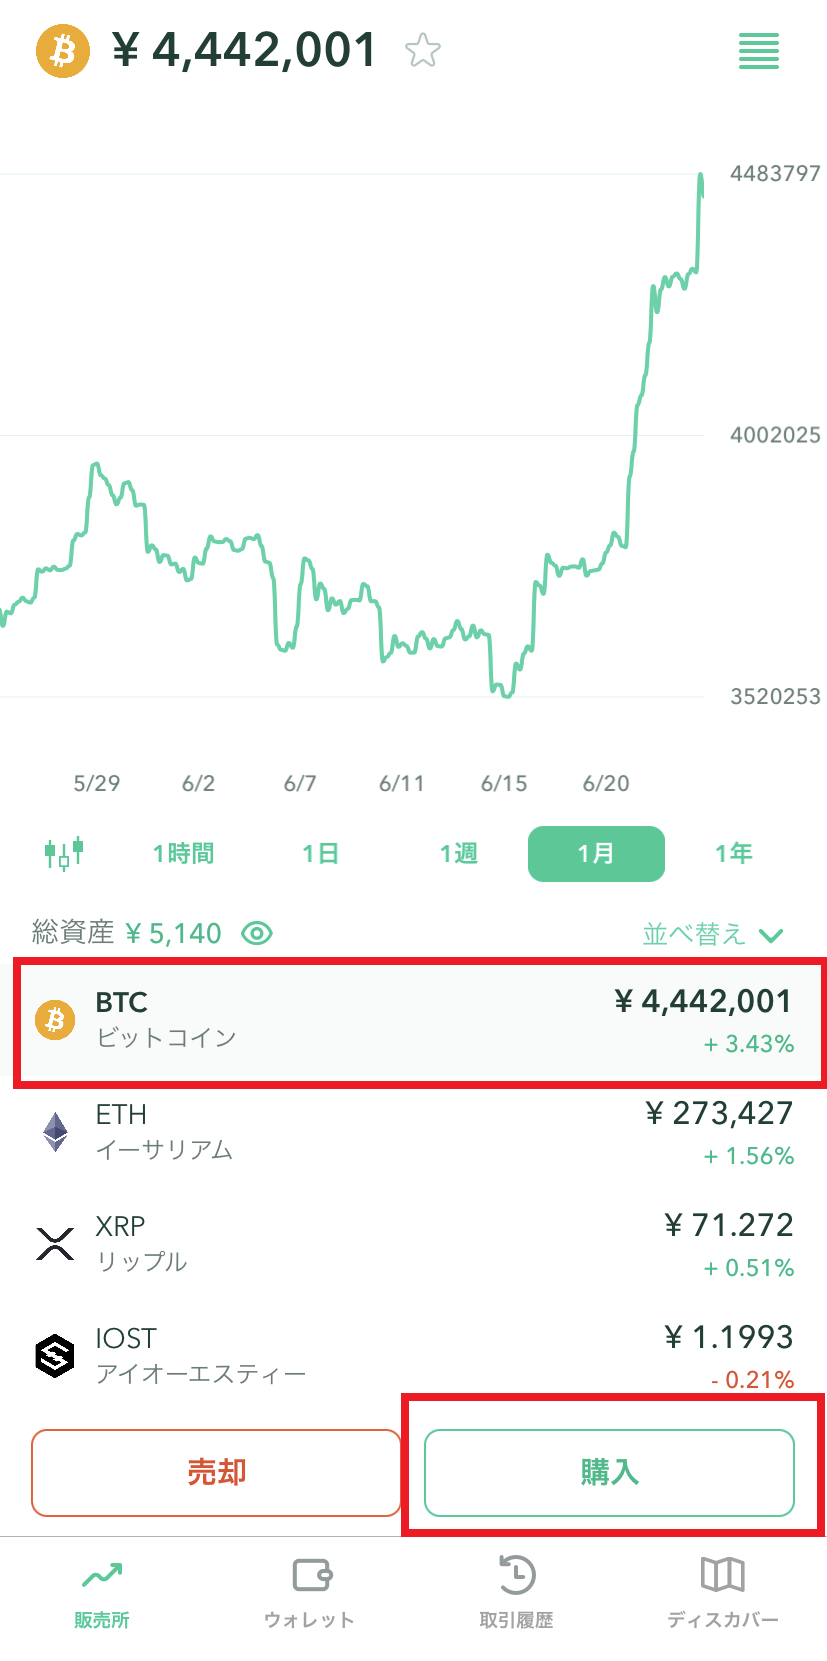 coincheck　アプリ画面　販売所